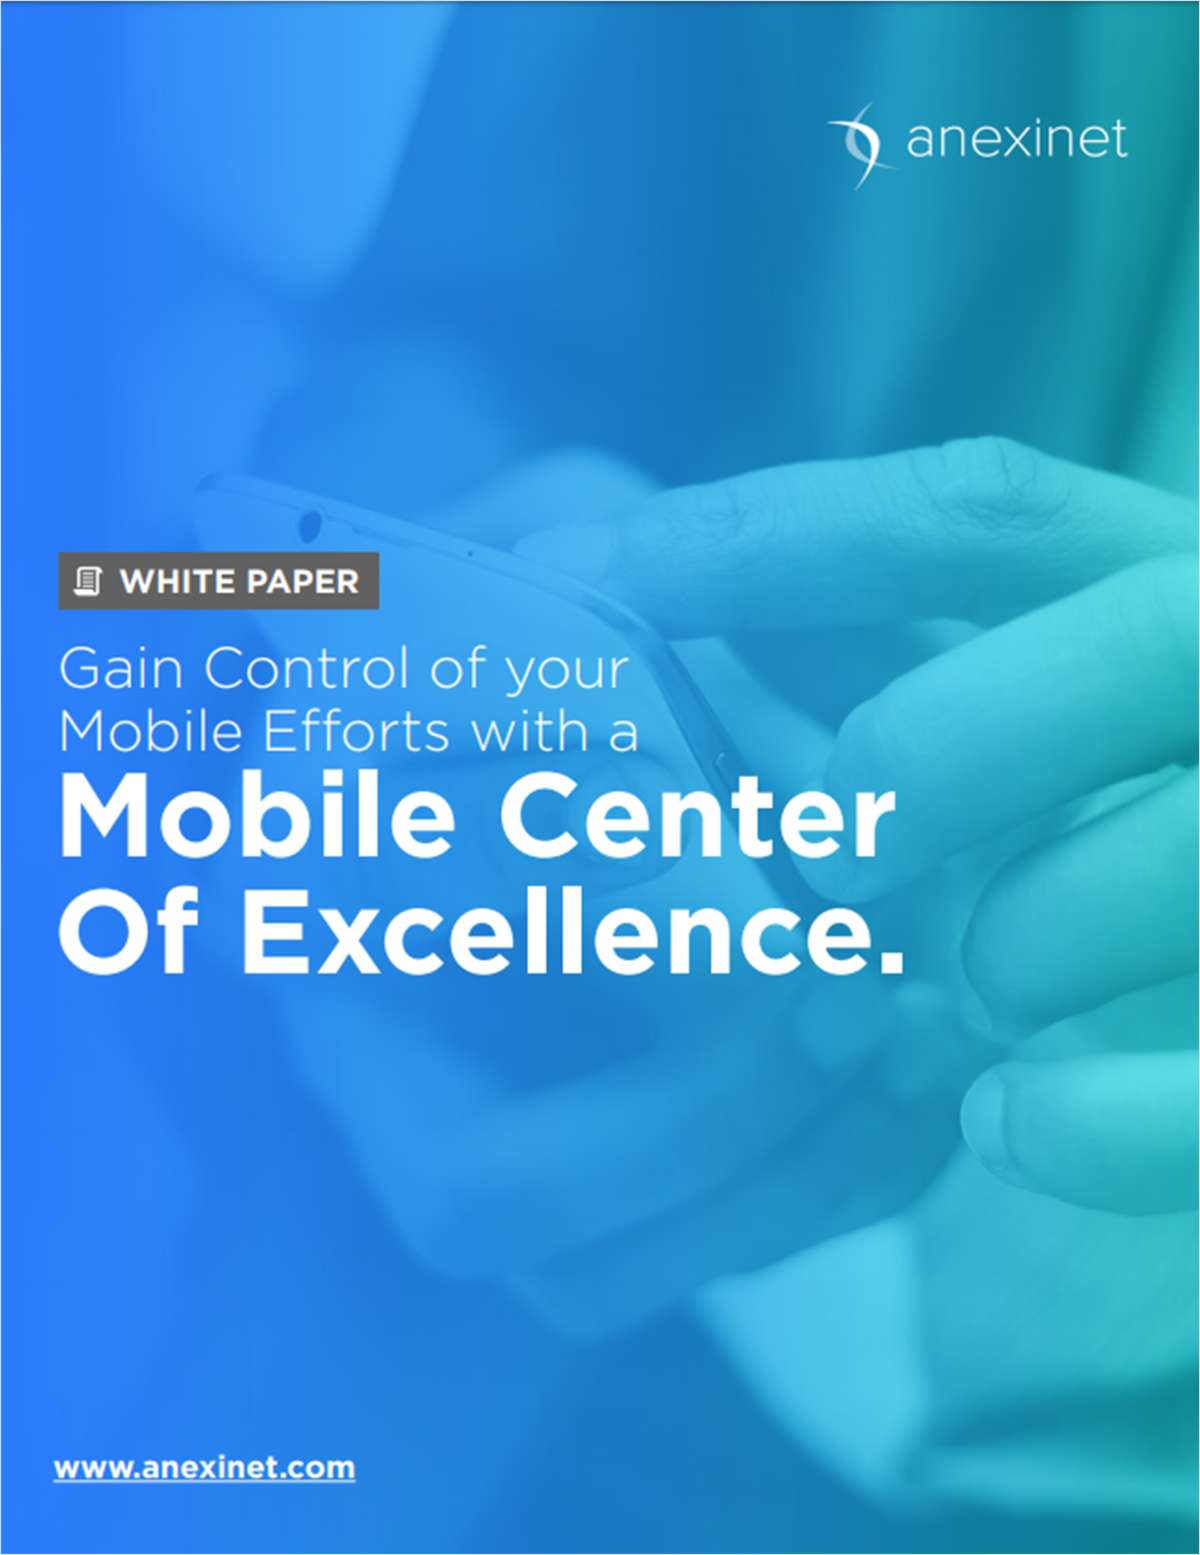 Gain Control of Your Mobile Efforts with a Mobile Center of Excellence